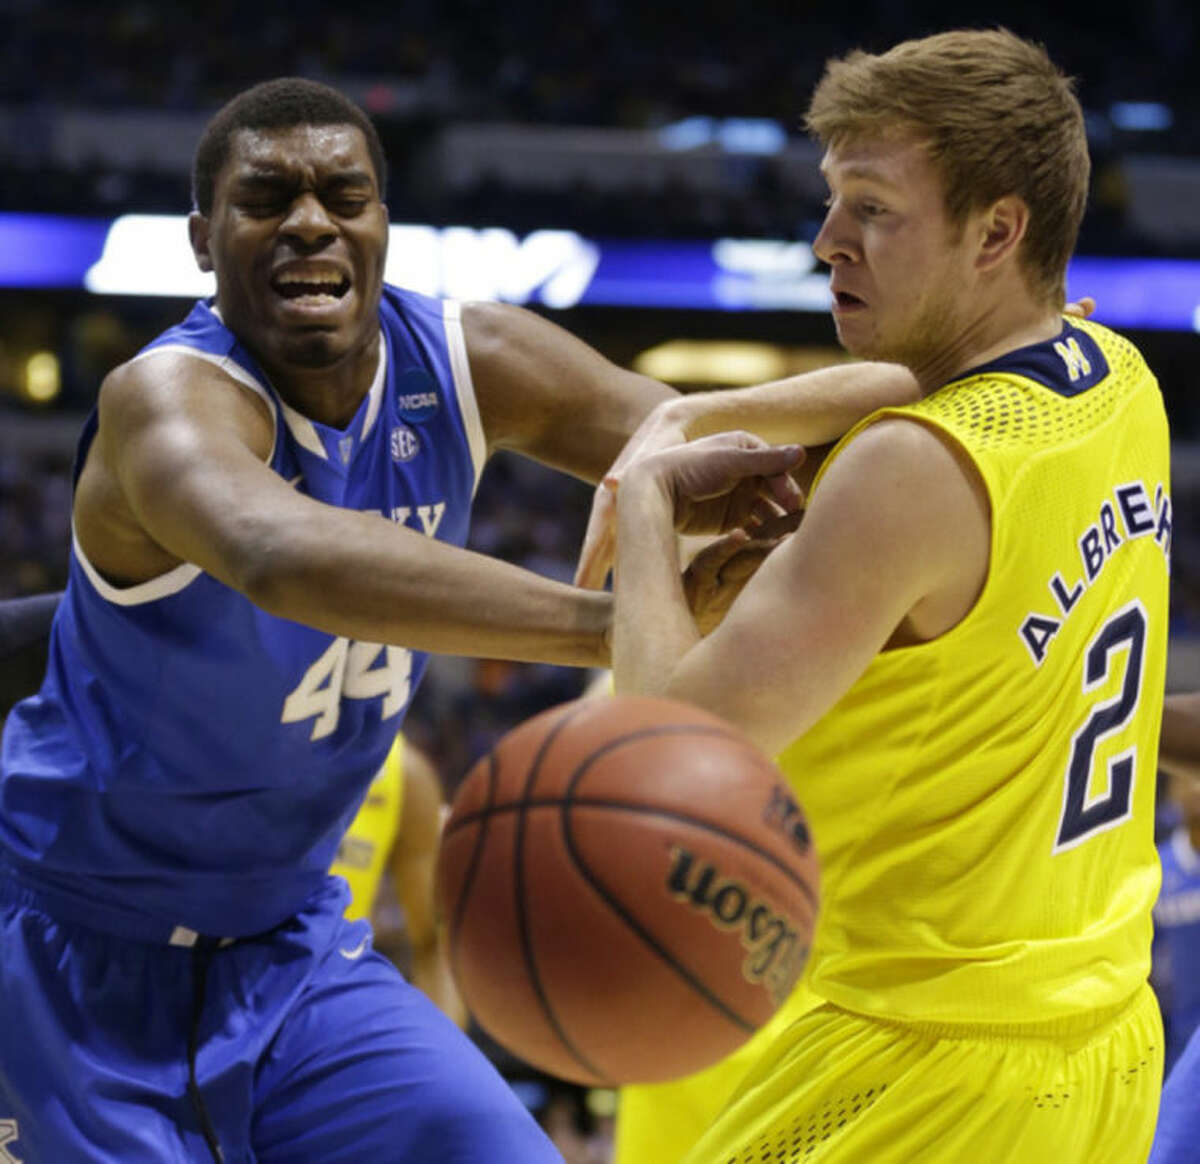 Kentucky's Dakari Johnson (44) and Michigan's Spike Albrecht (2) go after a loose ball during the first half of an NCAA Midwest Regional final college basketball tournament game Sunday, March 30, 2014, in Indianapolis. (AP Photo/Michael Conroy)